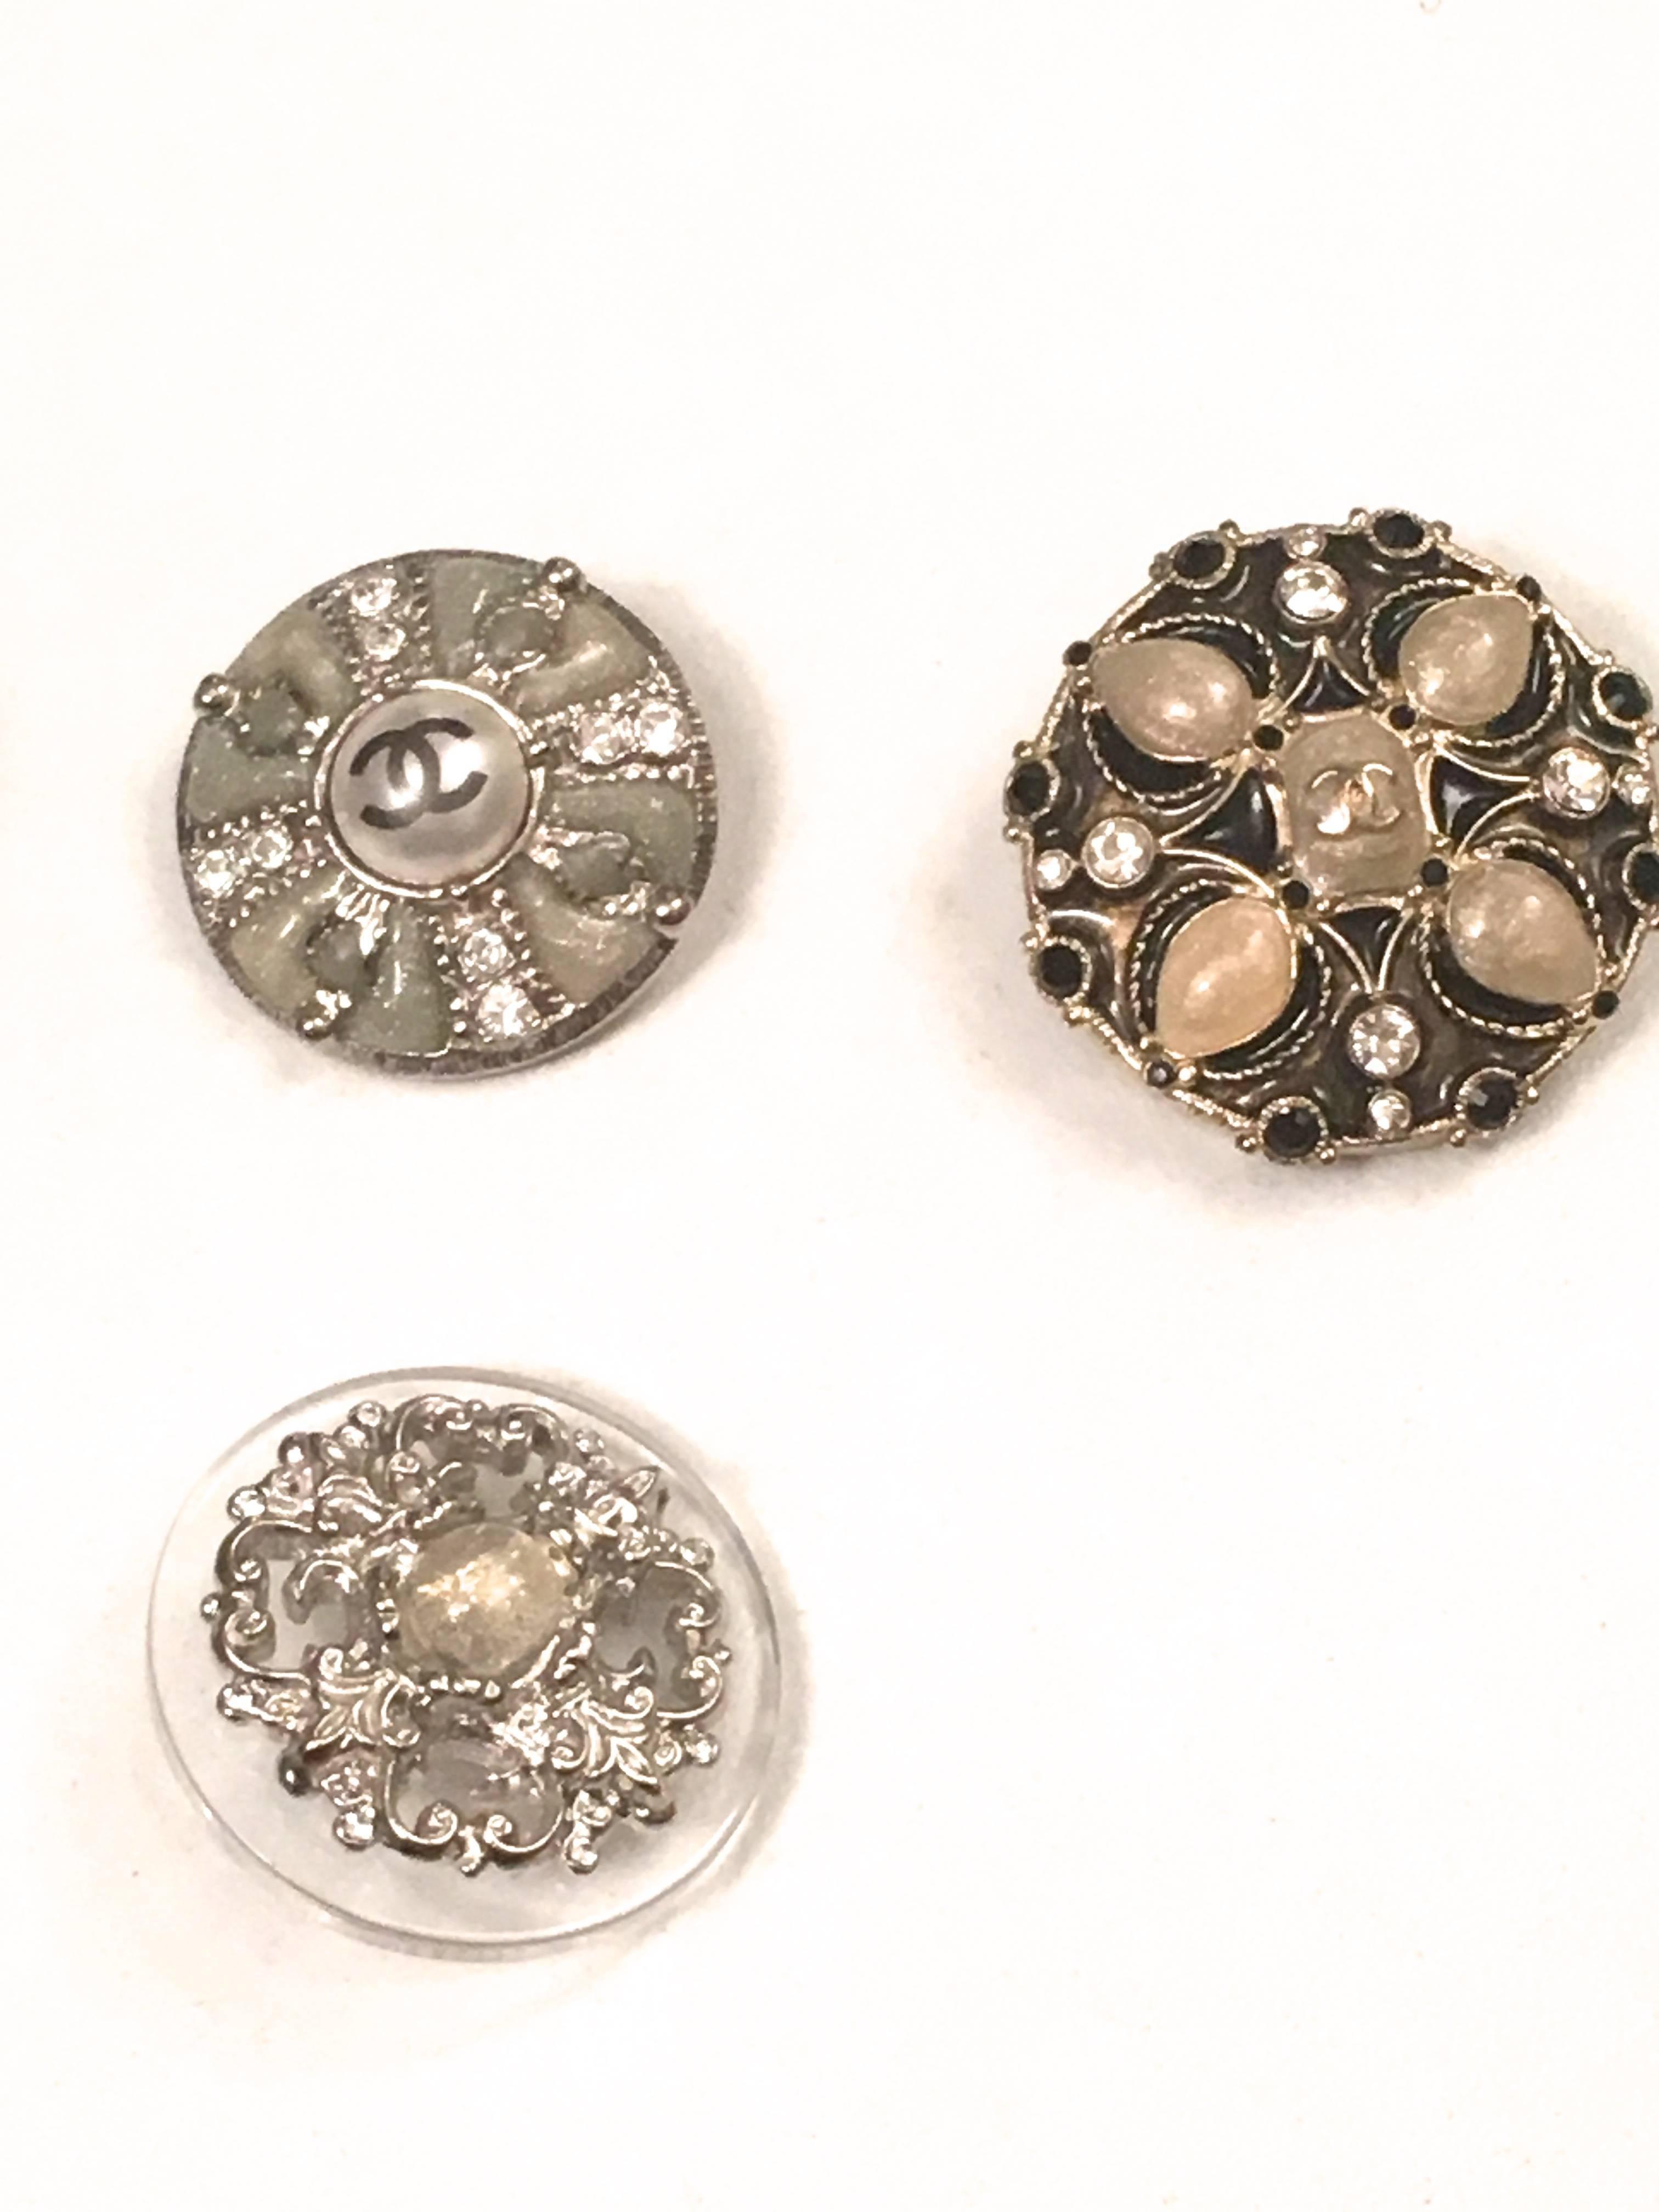 Presented here is an assorted lot of 5 different buttons from Chanel. The buttons are as follows:
 
- 1 button is comprised of faceted green, pink, blue and red rhinestones in a beautiful pattern with a CC logo at the center of the button. All